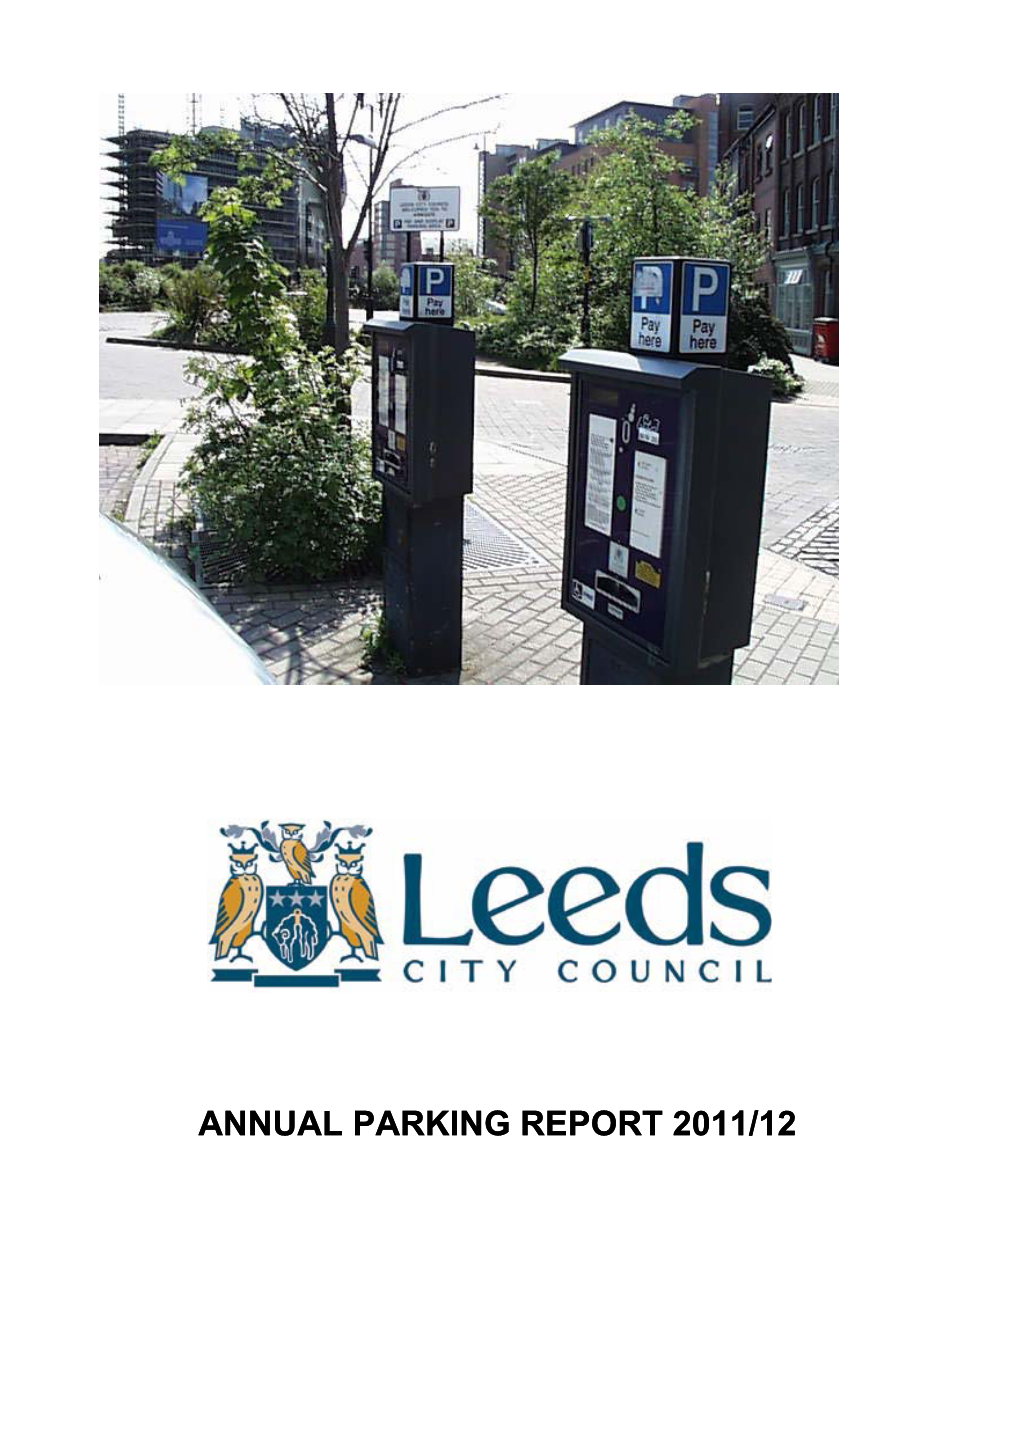 Annual Parking Report 2011/12